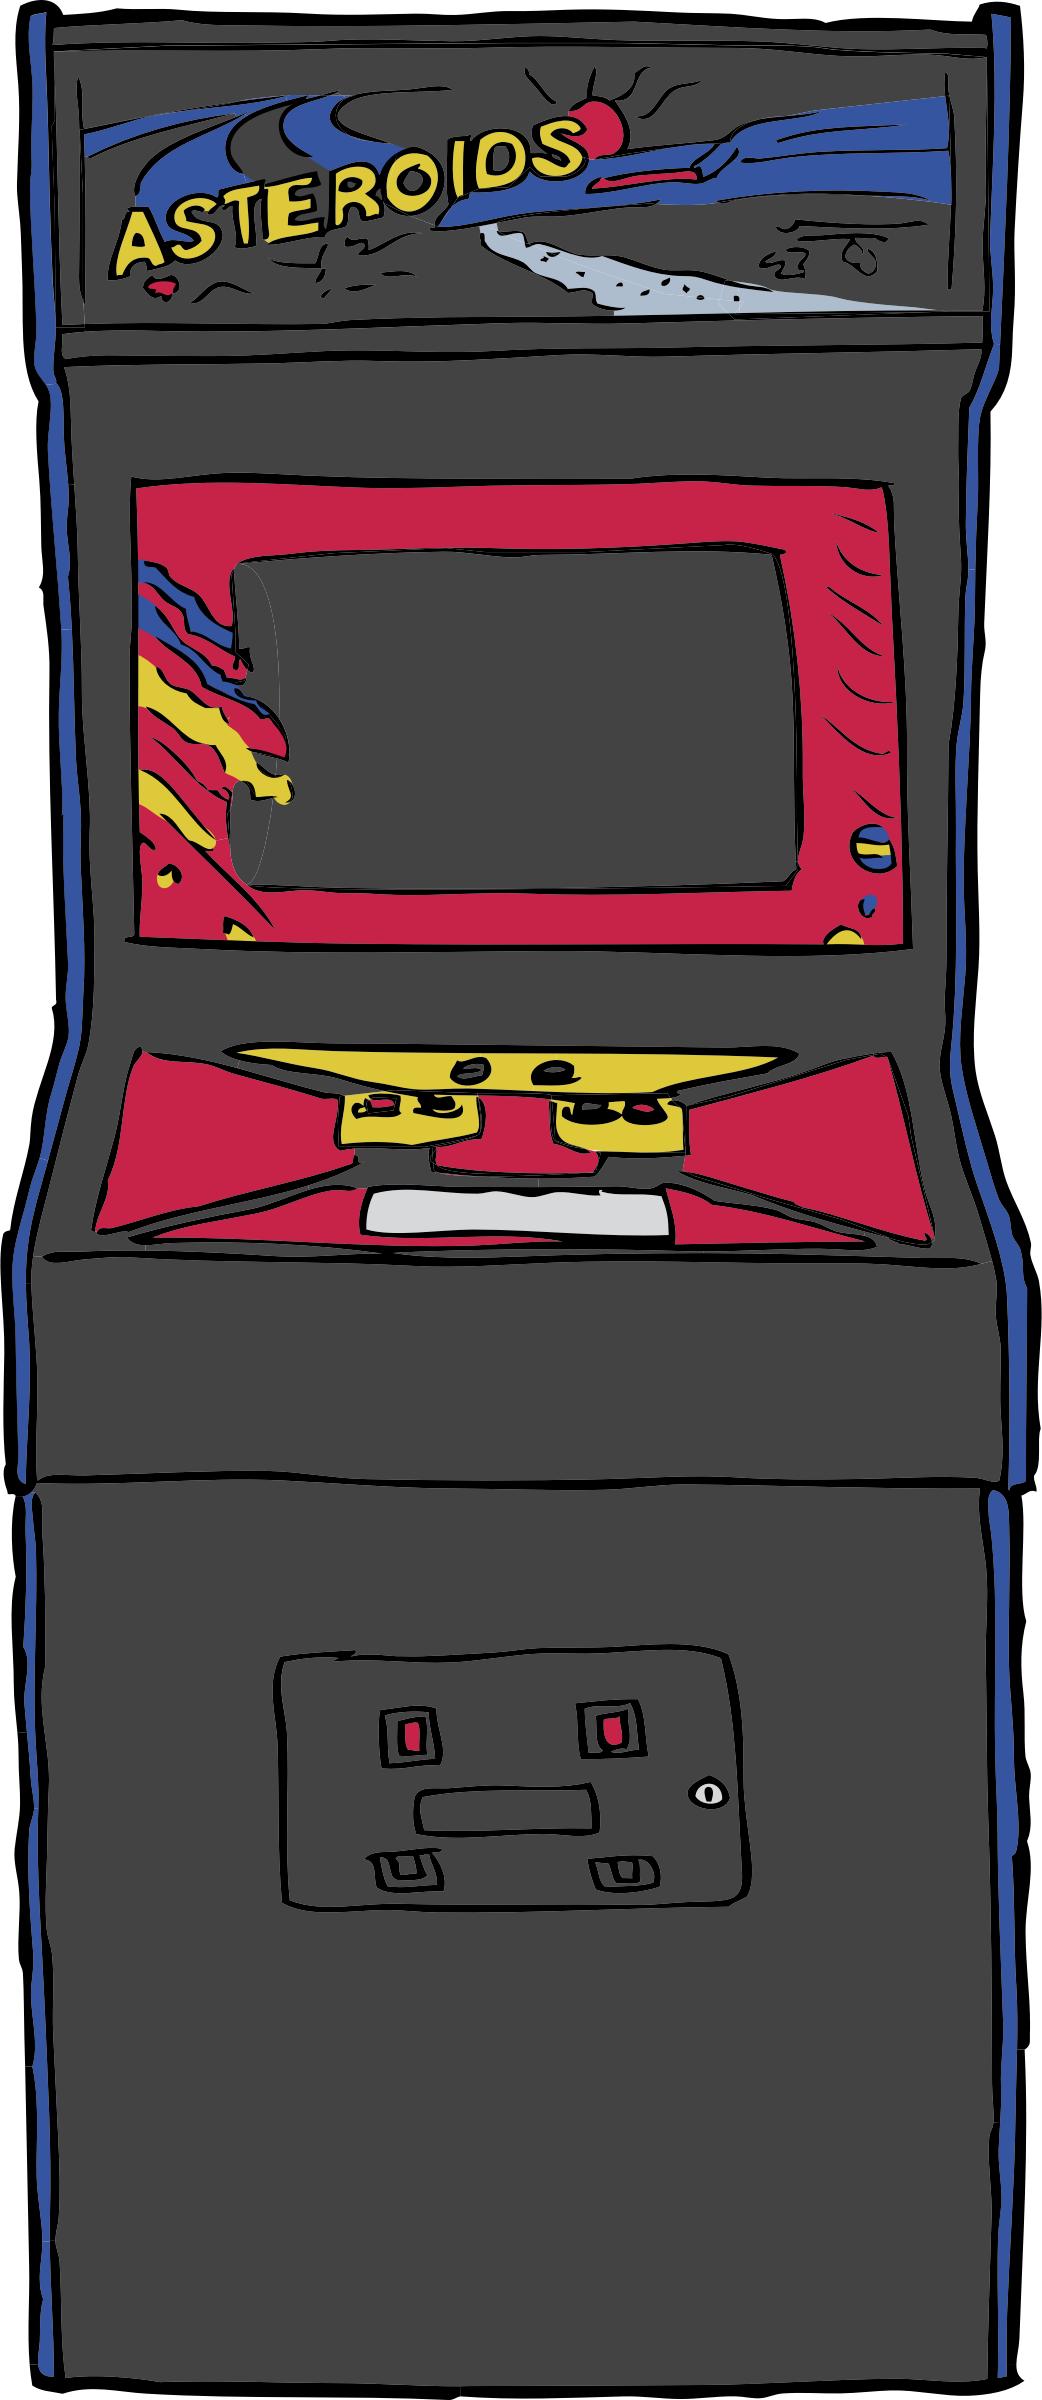 Asteroids Arcade Game png